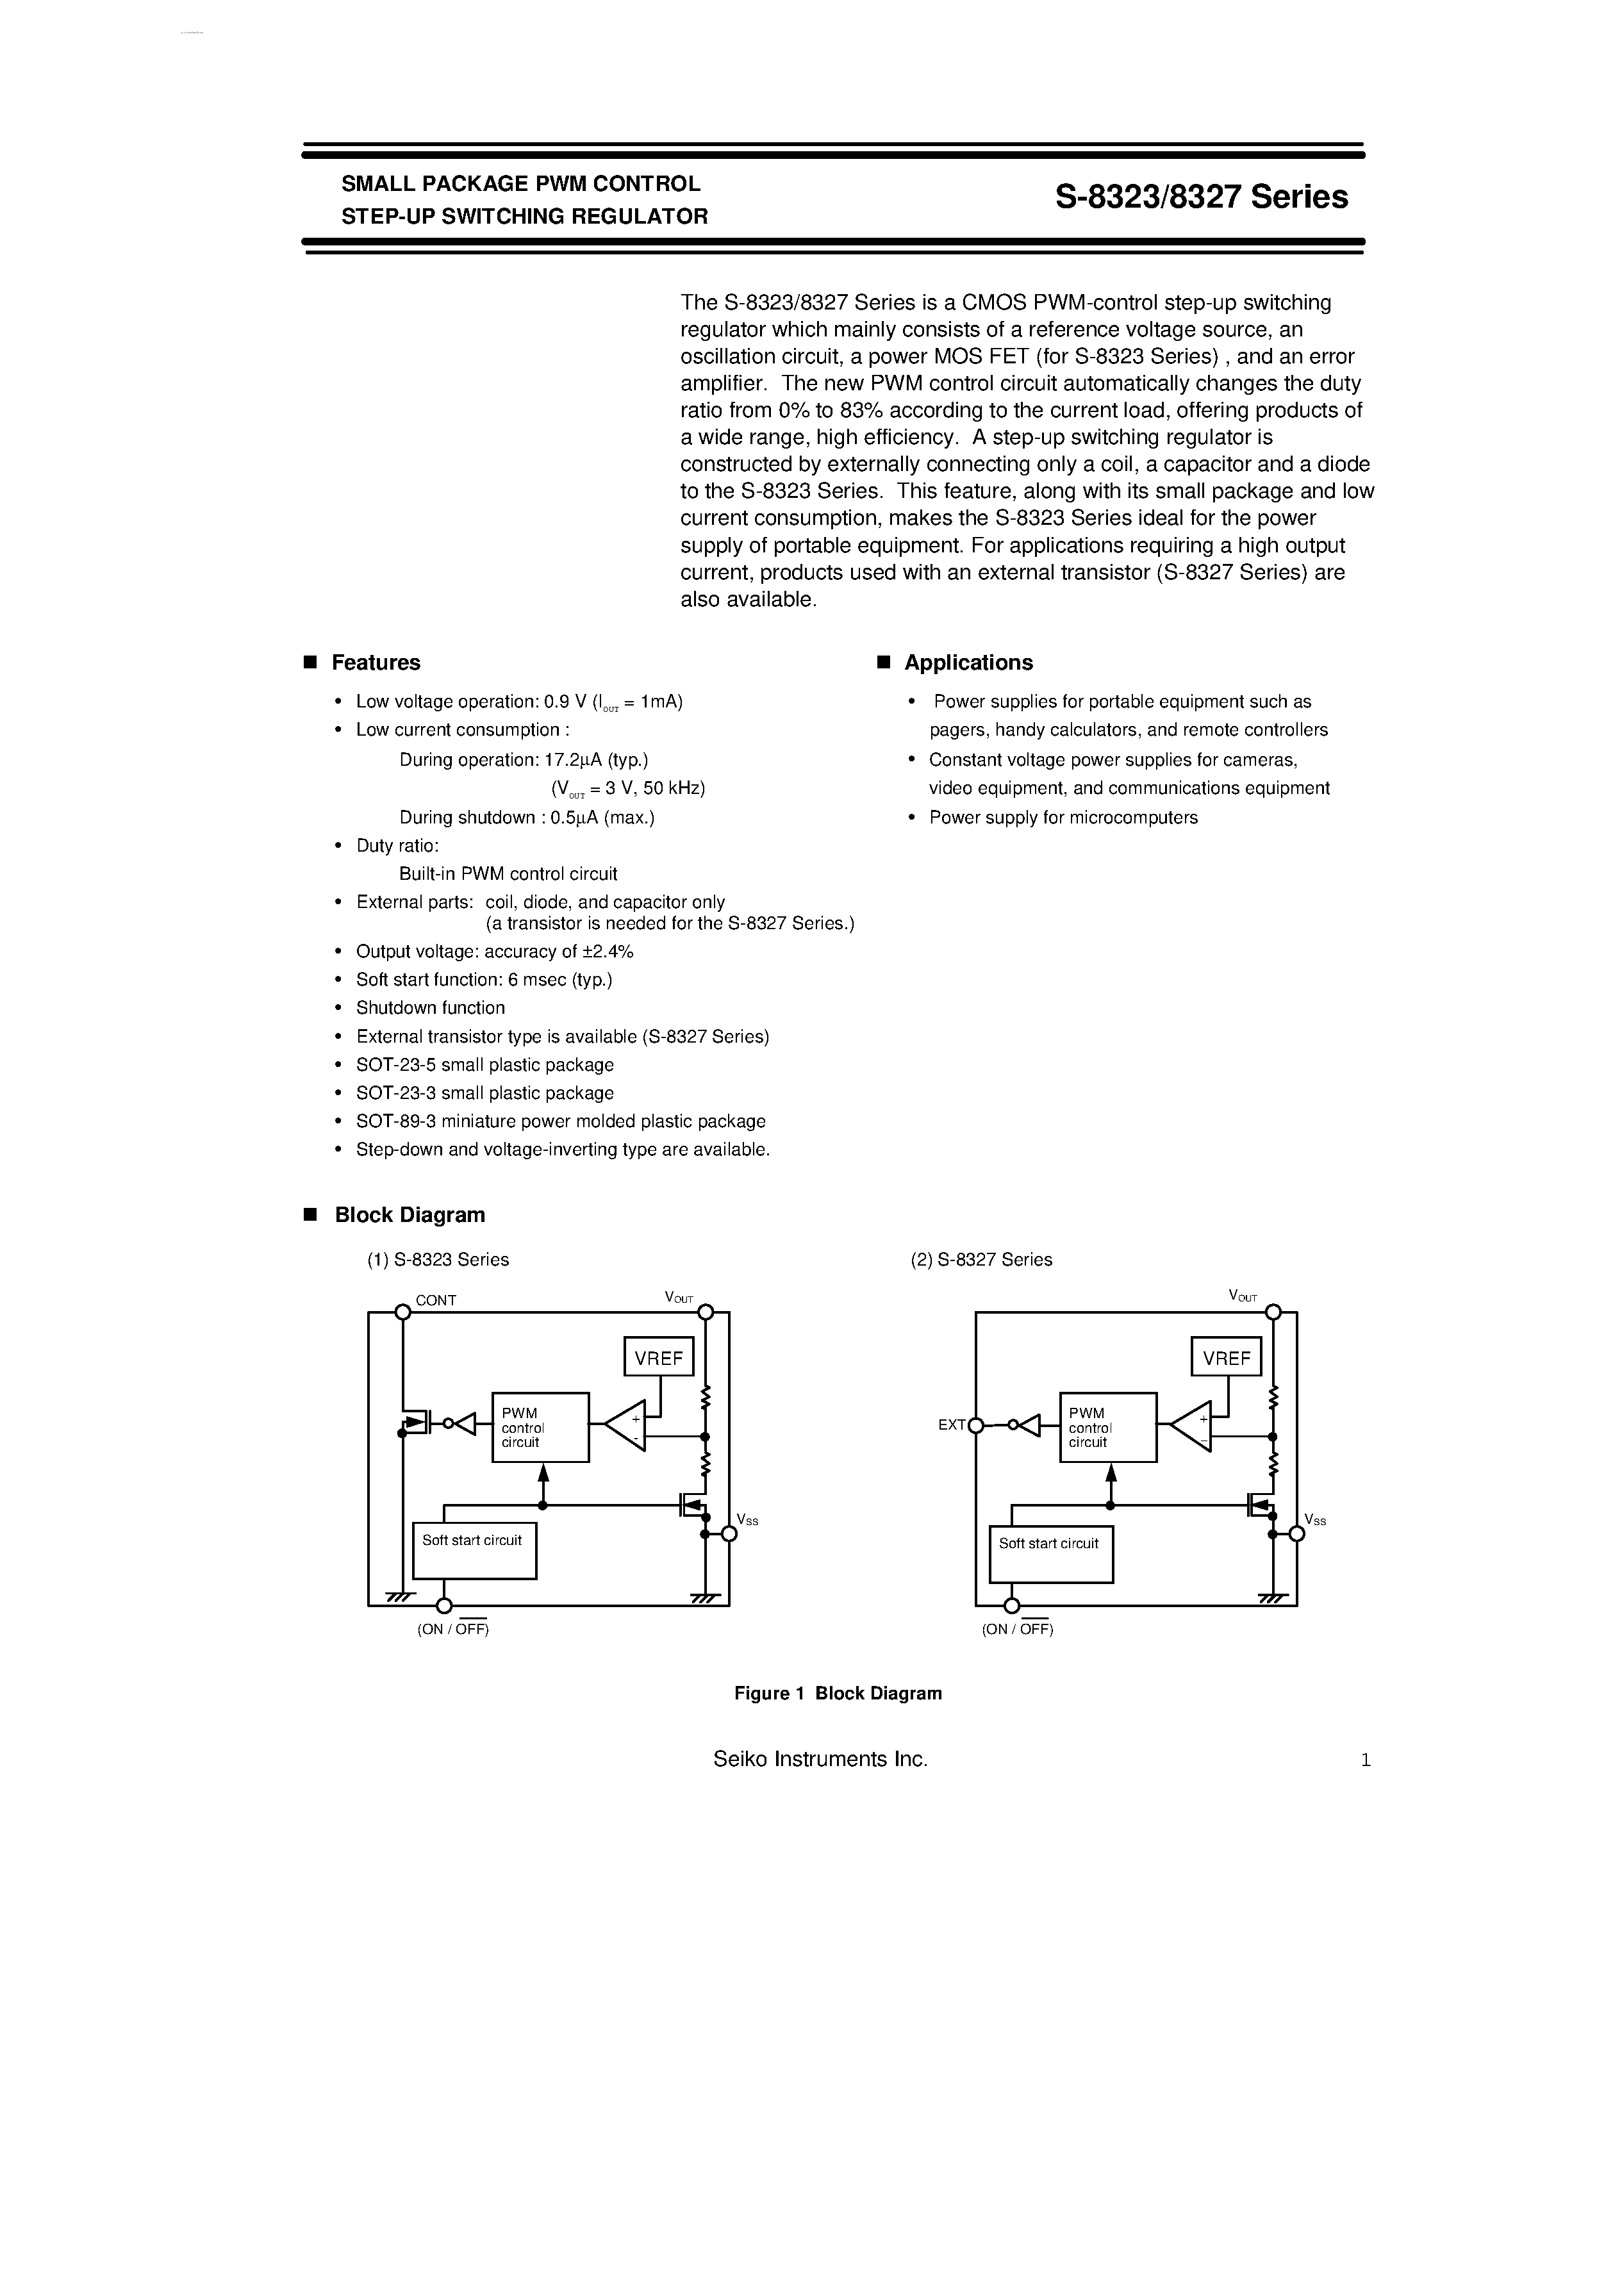 Datasheet S-8323 - (S-8323 / S-8327) SMALL PACKAGE PWM CONTROL STEP-UP SWITCHING REGULATOR page 2